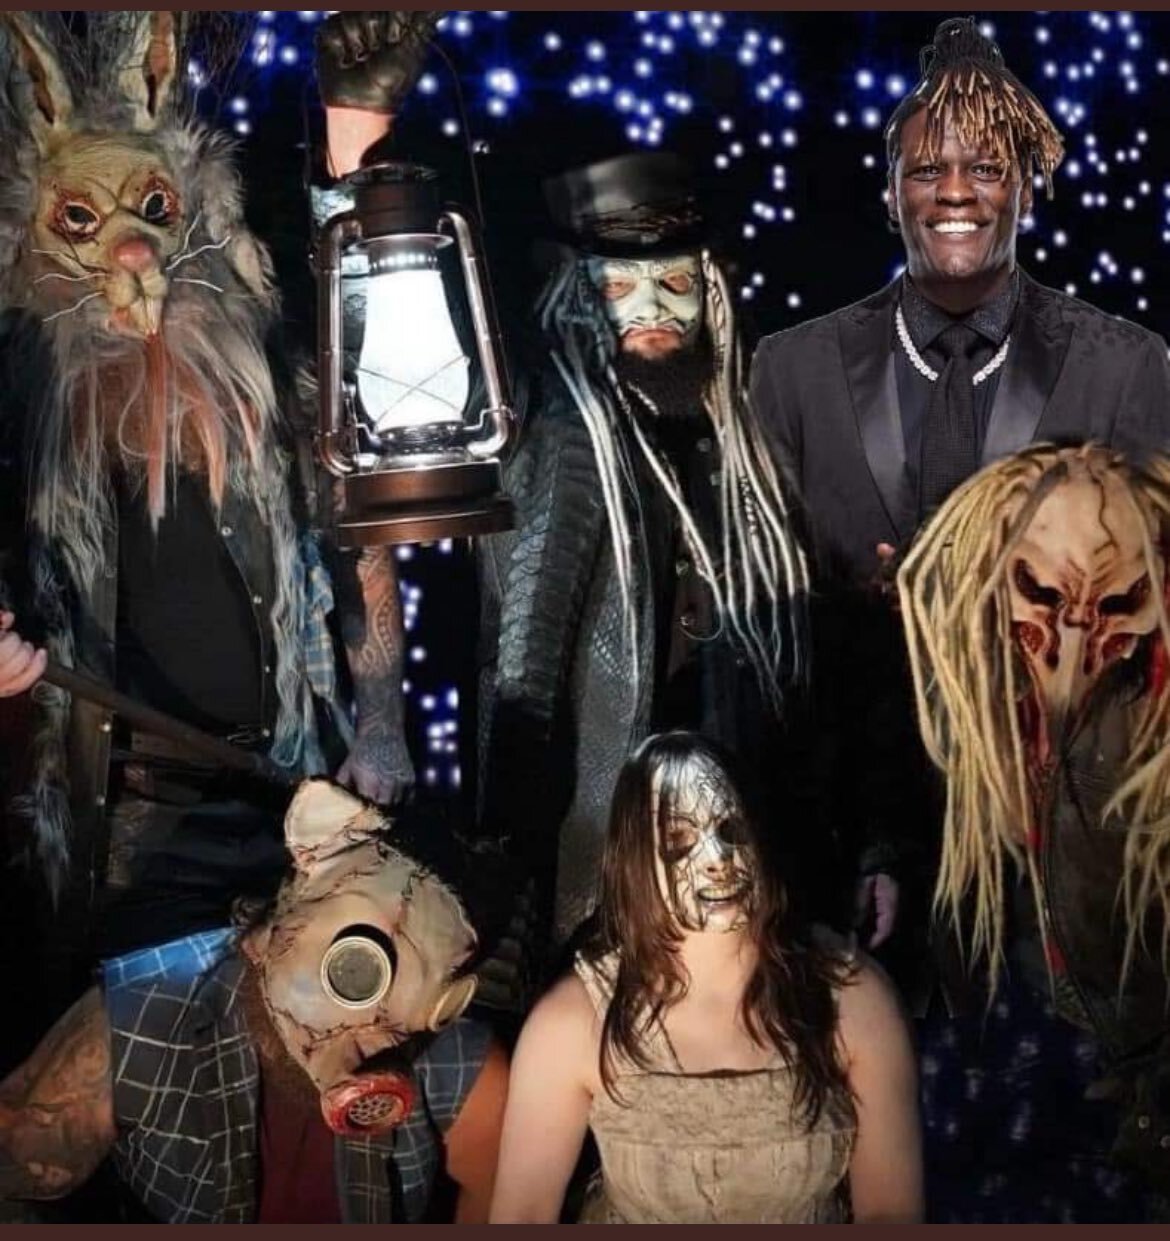 R-Truth Shares Hilarious Photoshopped Image Eyeing Alliance with WWE's Wyatt Sicks After Judgment Day Snub